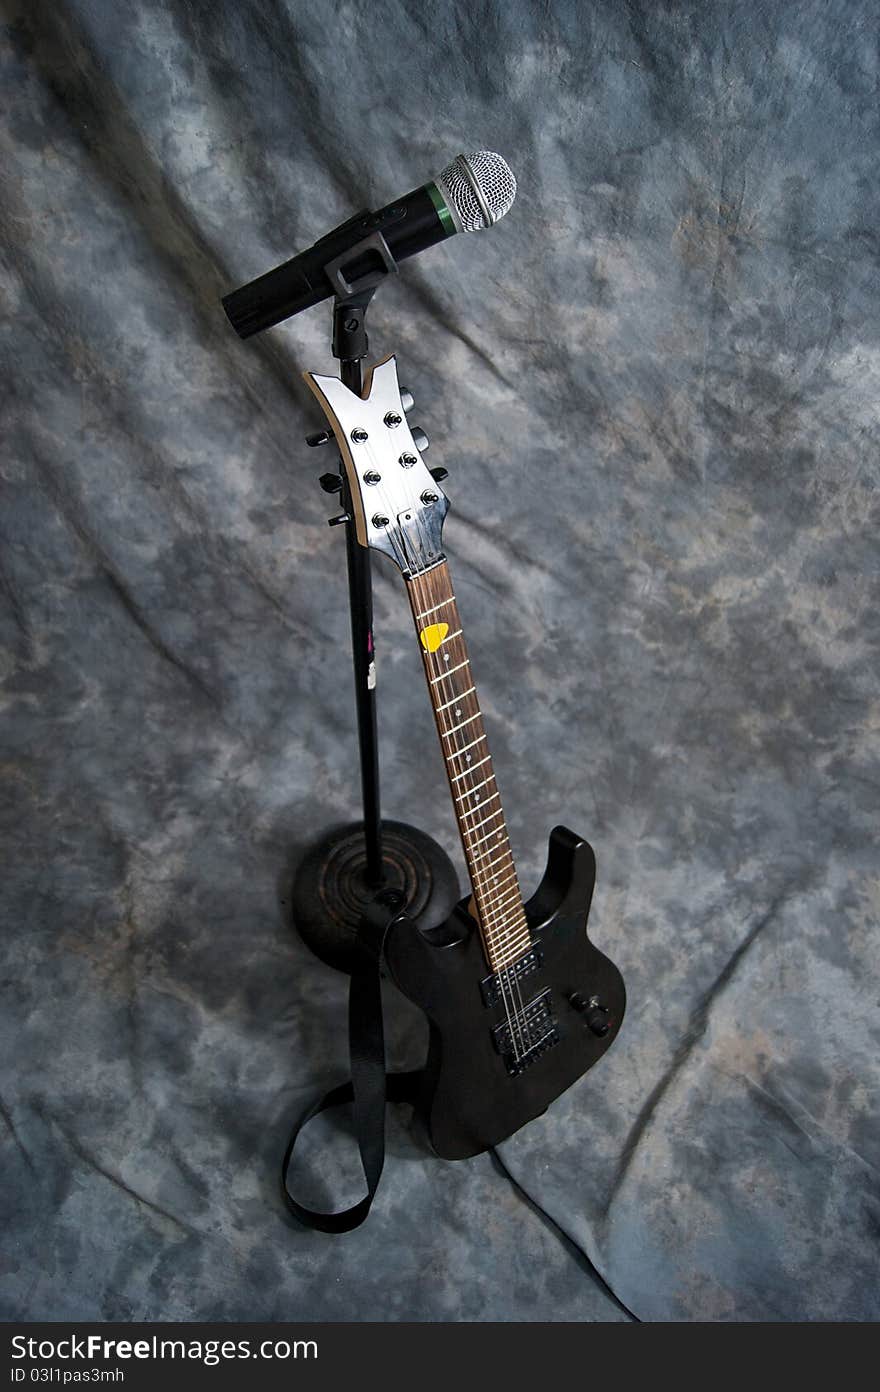 A black electric guitar is resting on a microphone stand with a microphone attached. A black electric guitar is resting on a microphone stand with a microphone attached.